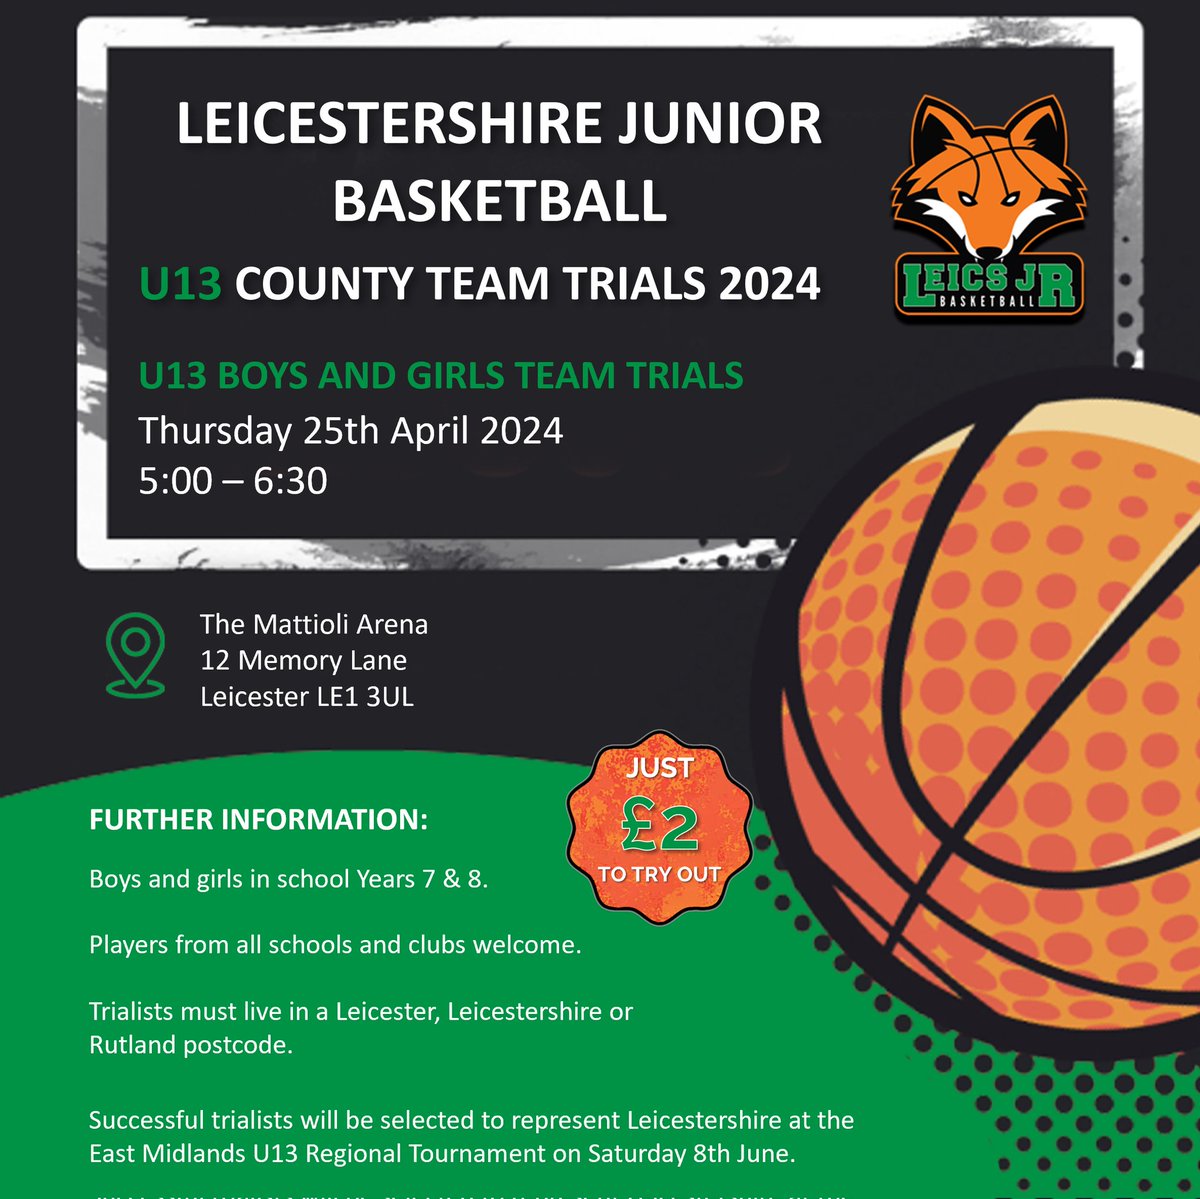 U13 BOYS AND GIRLS TRIALS We're thrilled to announce that for the first time we'll also be entering U13 county teams into the East Midlands championships. Boys and girls in school Years 7 and 8 can now sign up for our trials using the link in our bio.